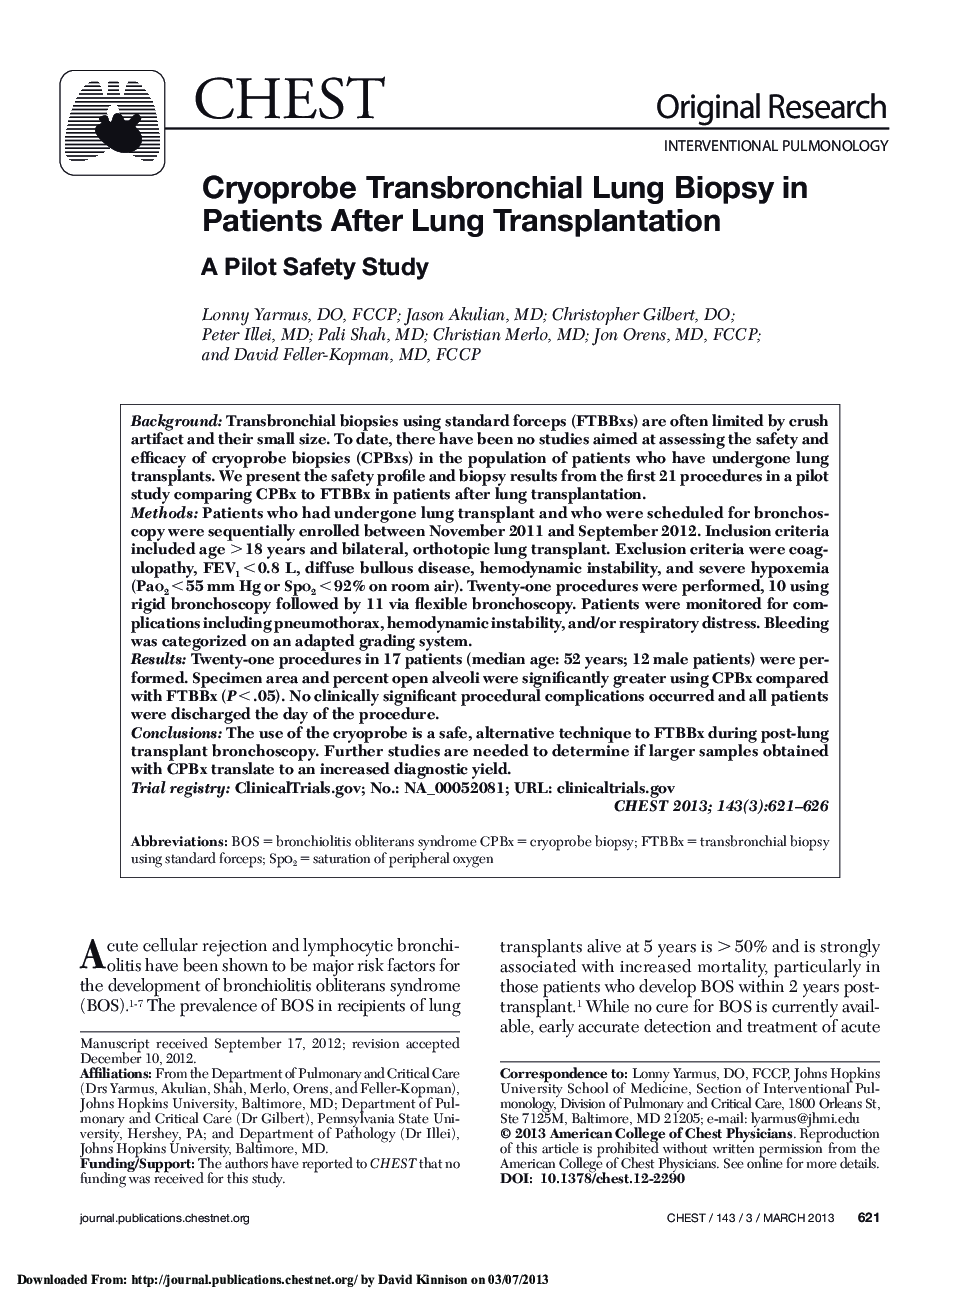 Cryoprobe Transbronchial Lung Biopsy in Patients After Lung Transplantation